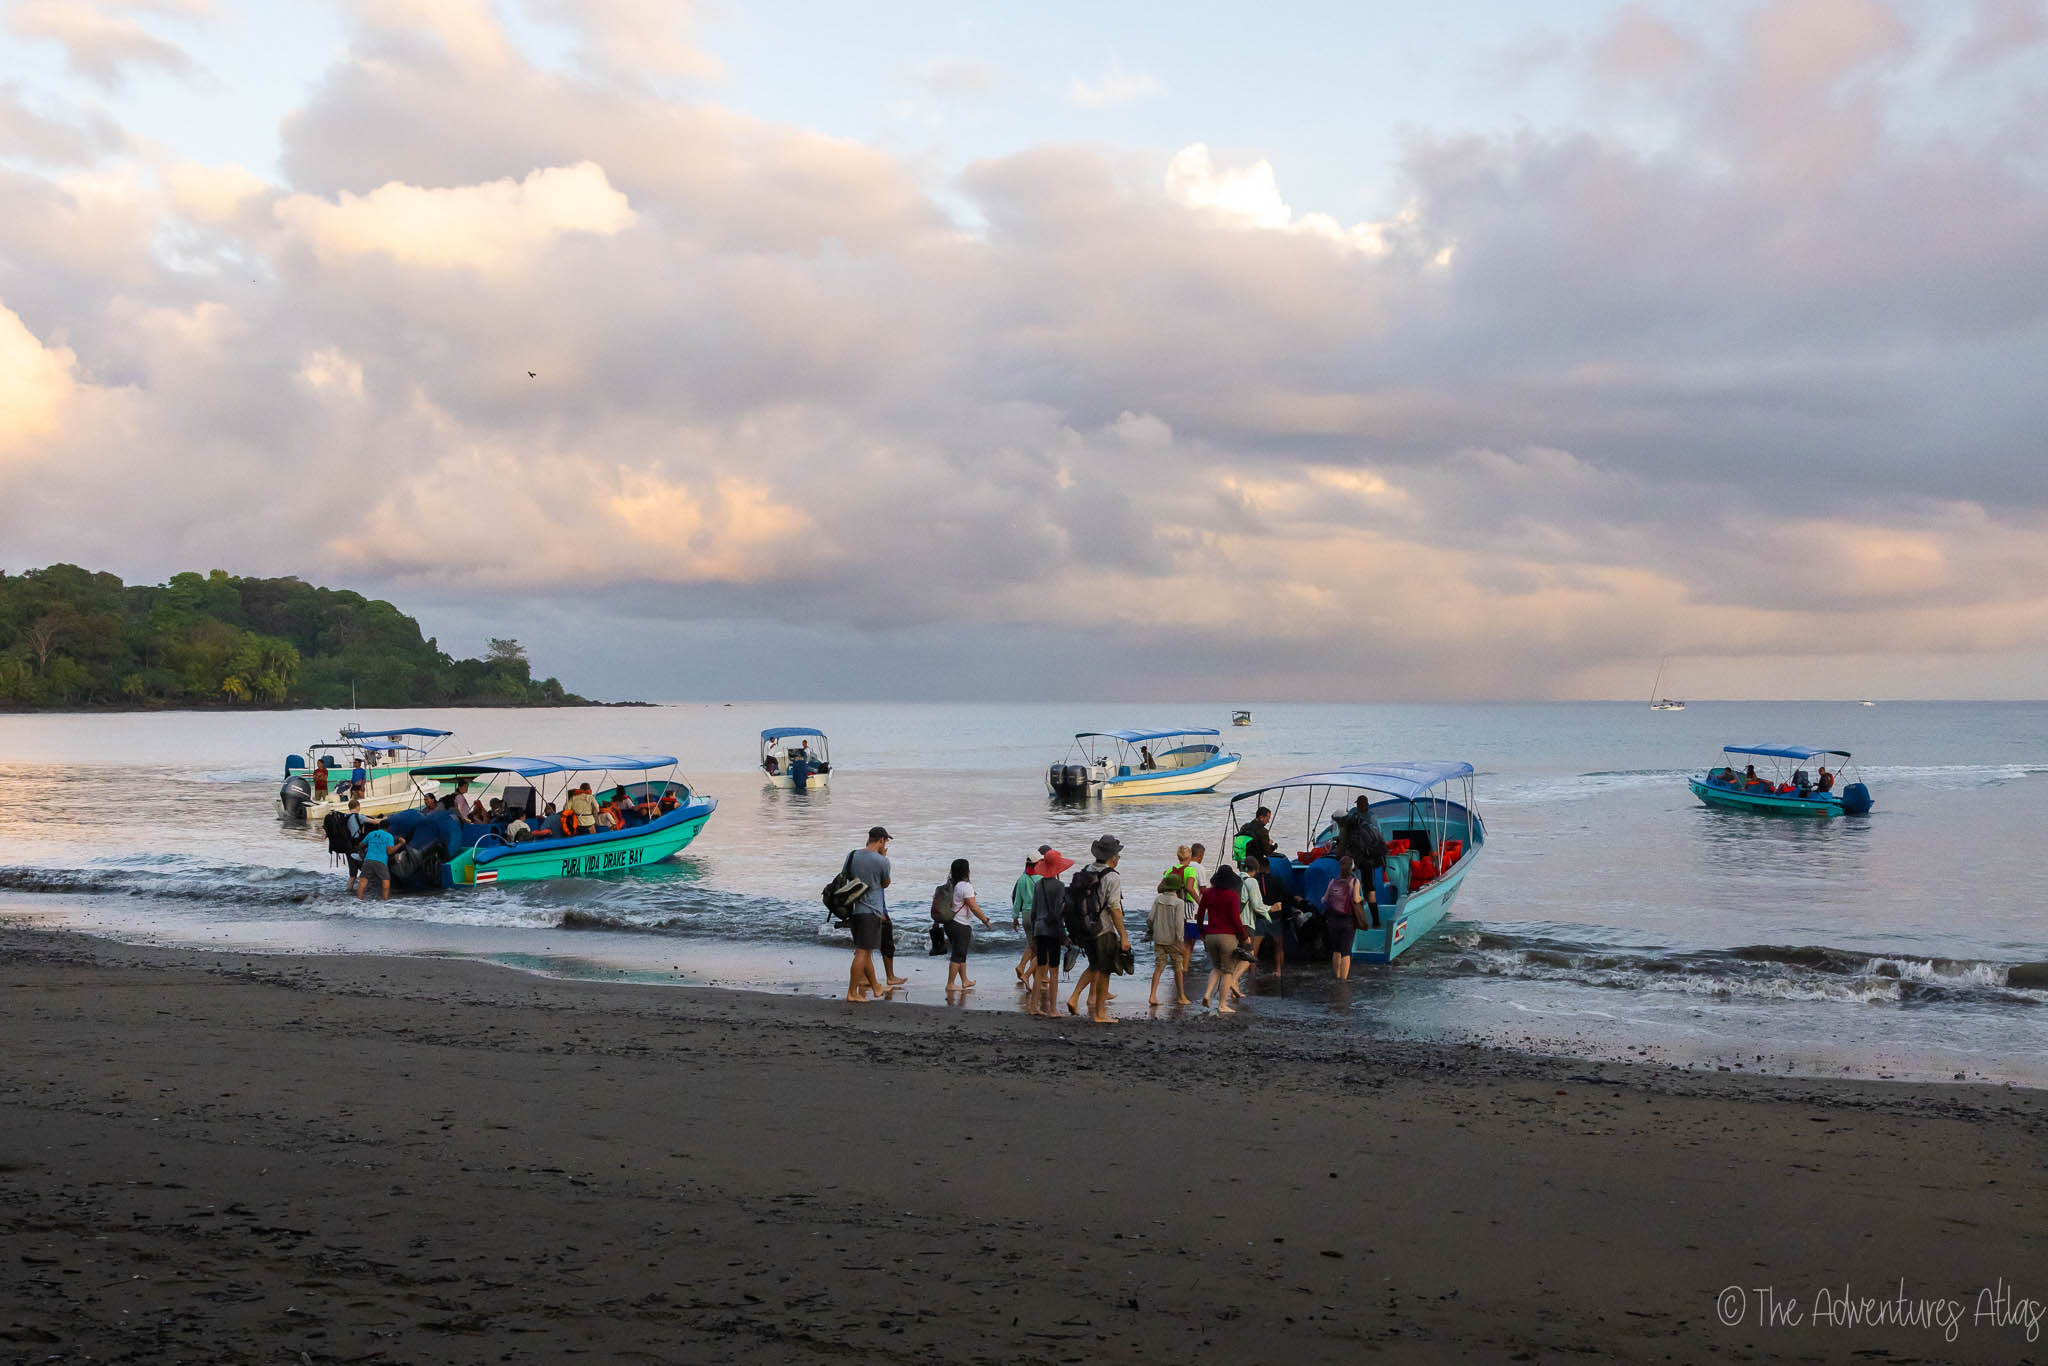 People getting onto the boat on Playa Colorada in Drake Bay, Costa Rica